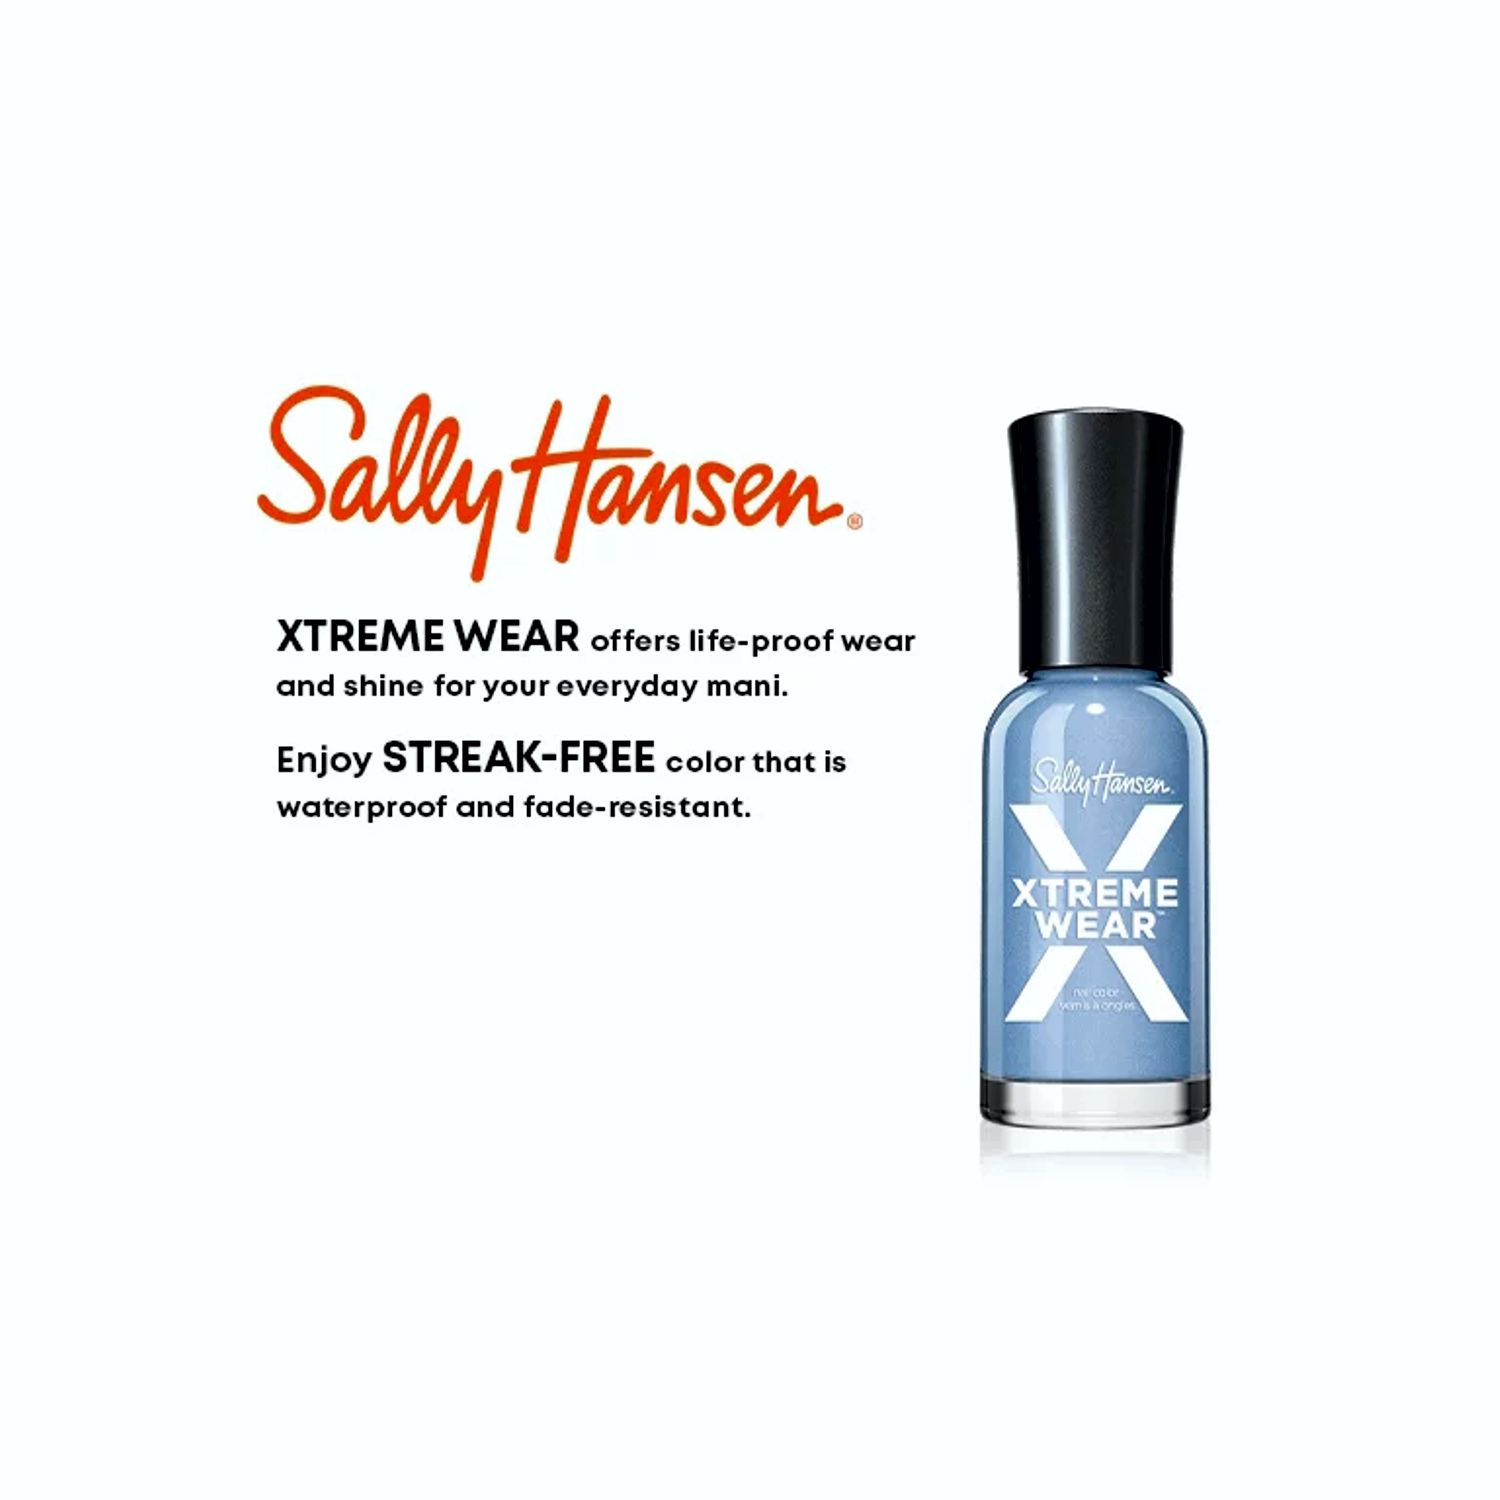 Sally Hansen Xtreme Wear Nail Polish, Silver Storm, 0.4 oz, Chip Resistant, Bold Color - image 4 of 6